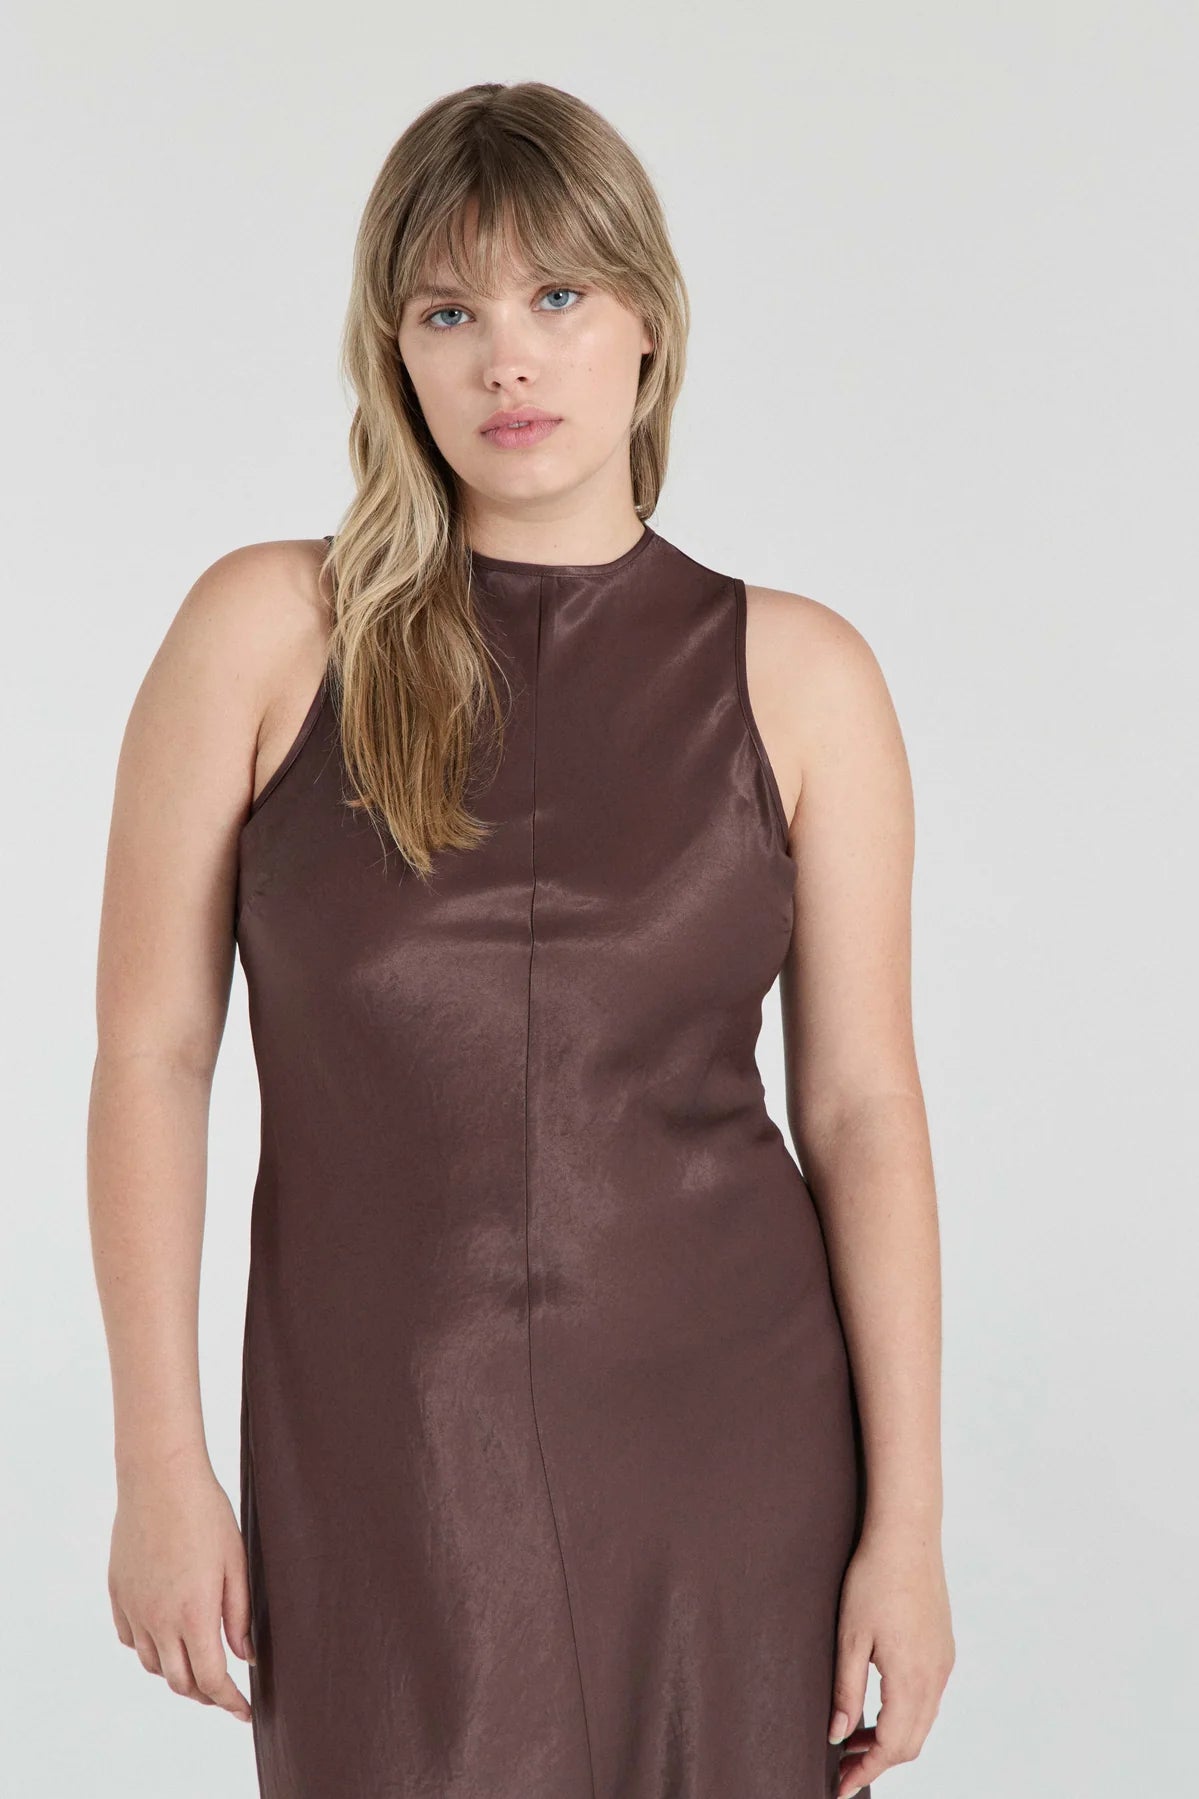 THE WILLA DRESS - CHOCOLATE - FRIENDS WITH FRANK